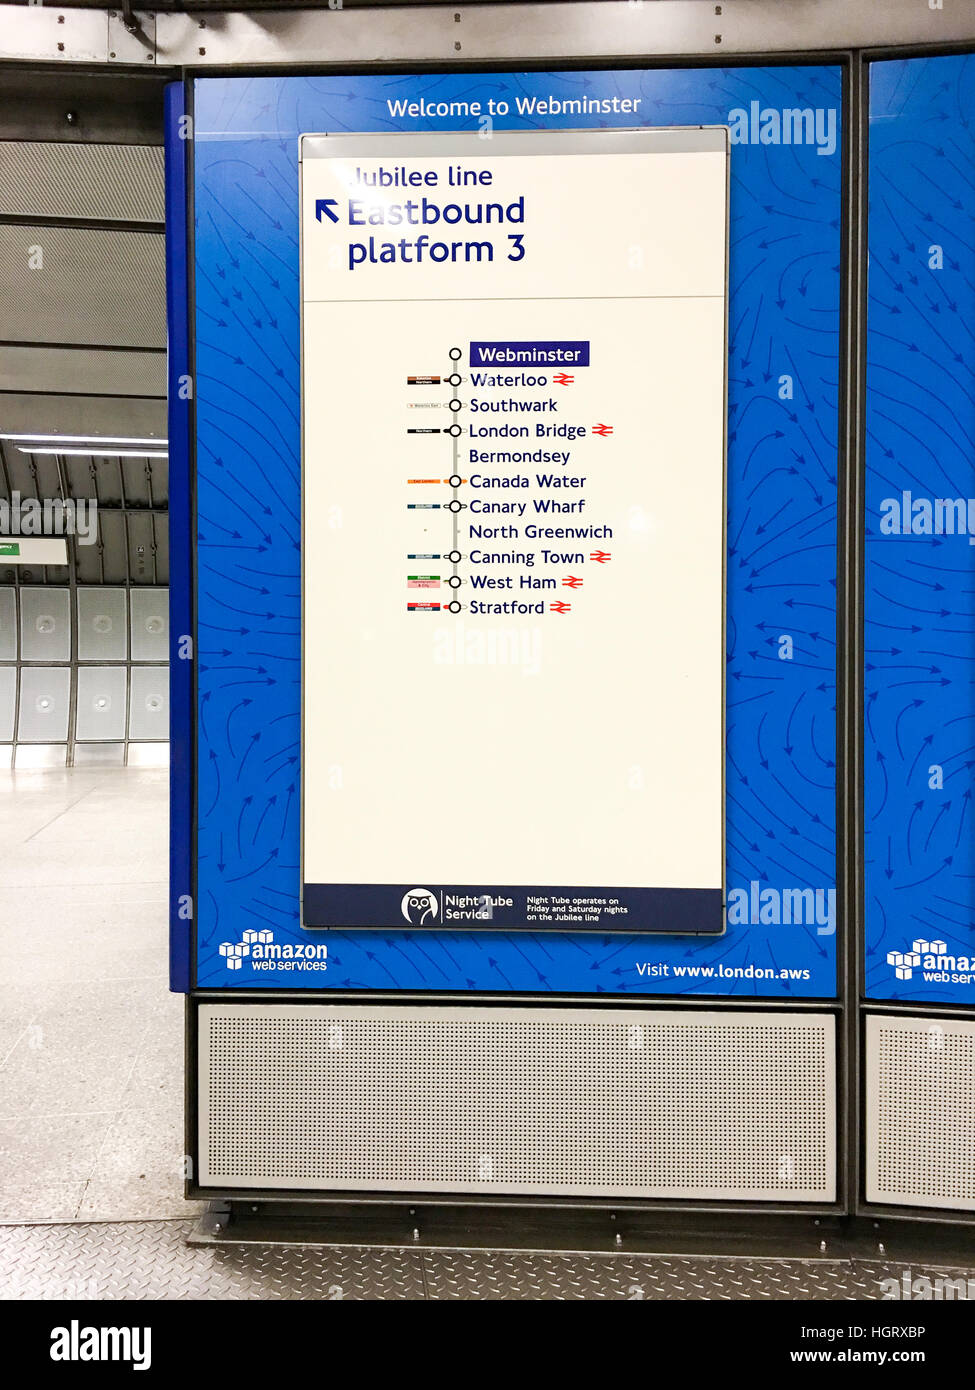 London, United Kingdom. 12th January, 2017. London Underground Westminster  Station has been rebranded as 'Webminster' Station during a one-day  campaign sponsored by Amazon, in collaboration with Transport for London.  Credit: Kathy Li/Alamy